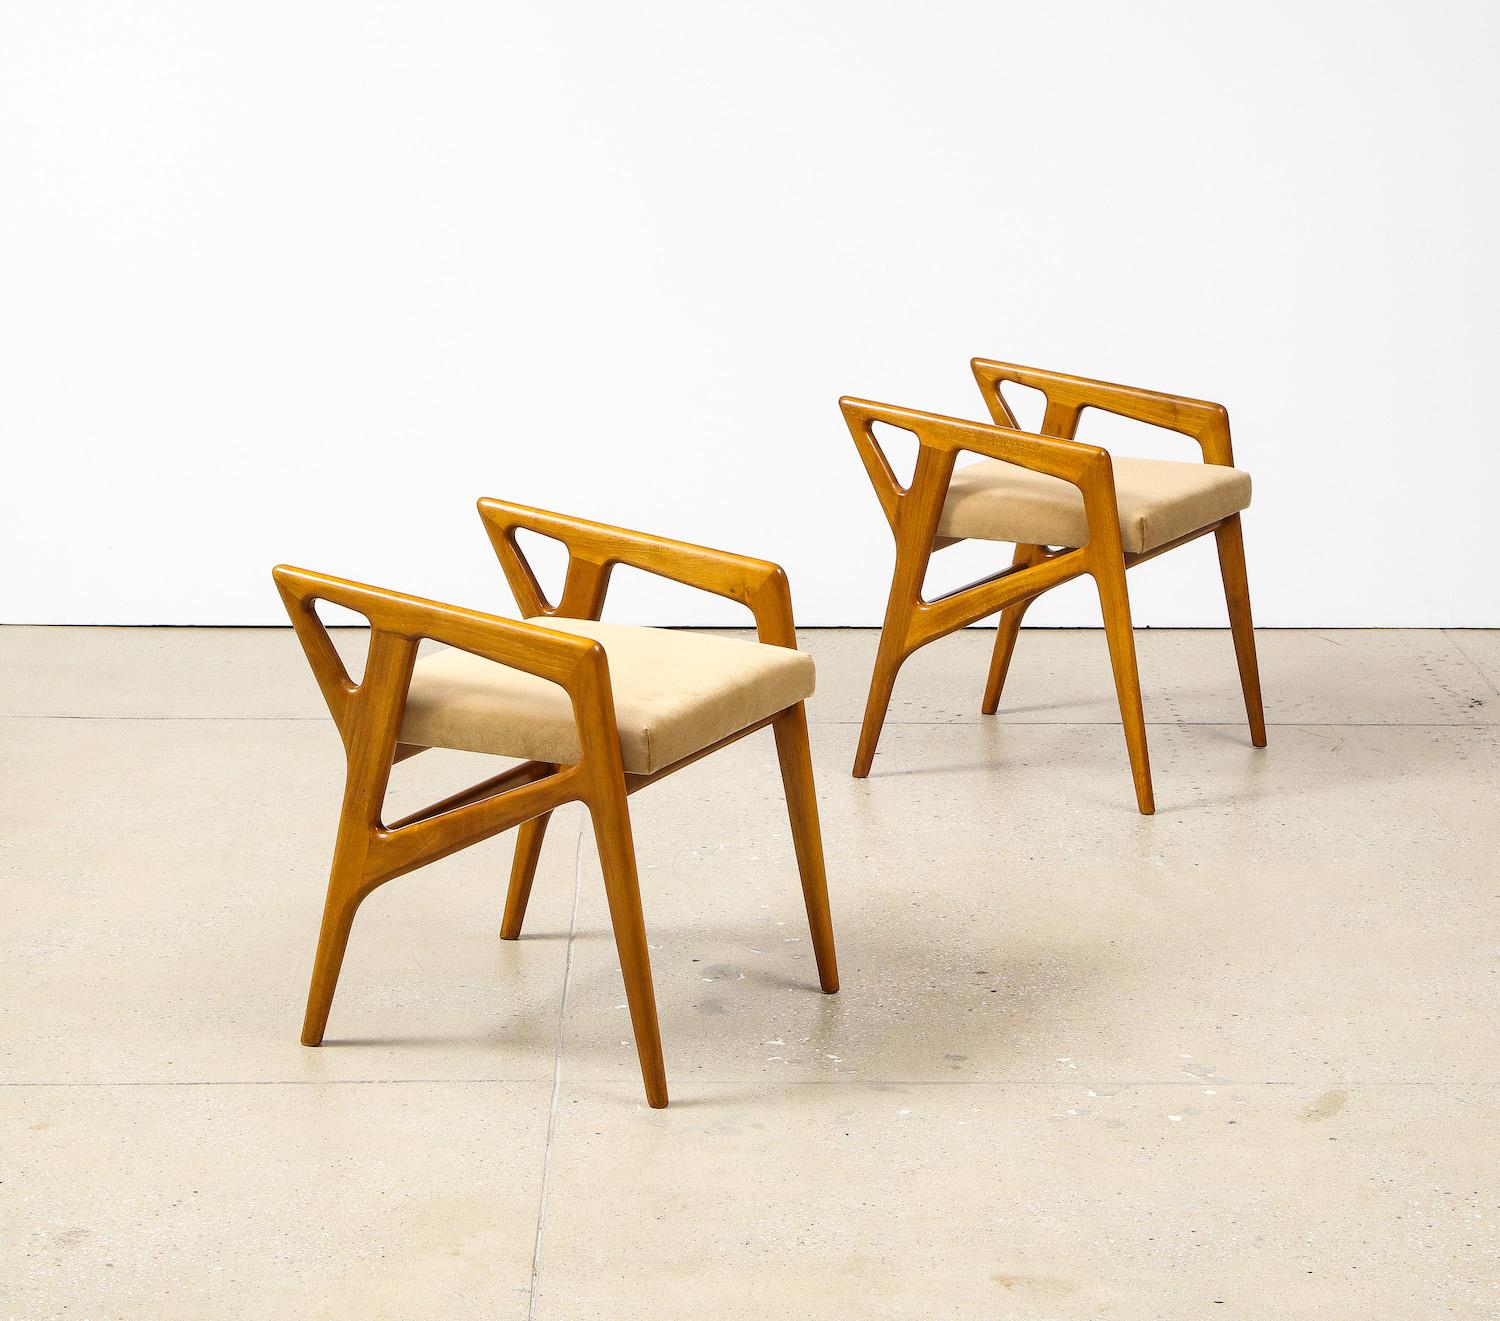 Hand-Crafted Rare Pair of Sculptural Stools by Gio Ponti